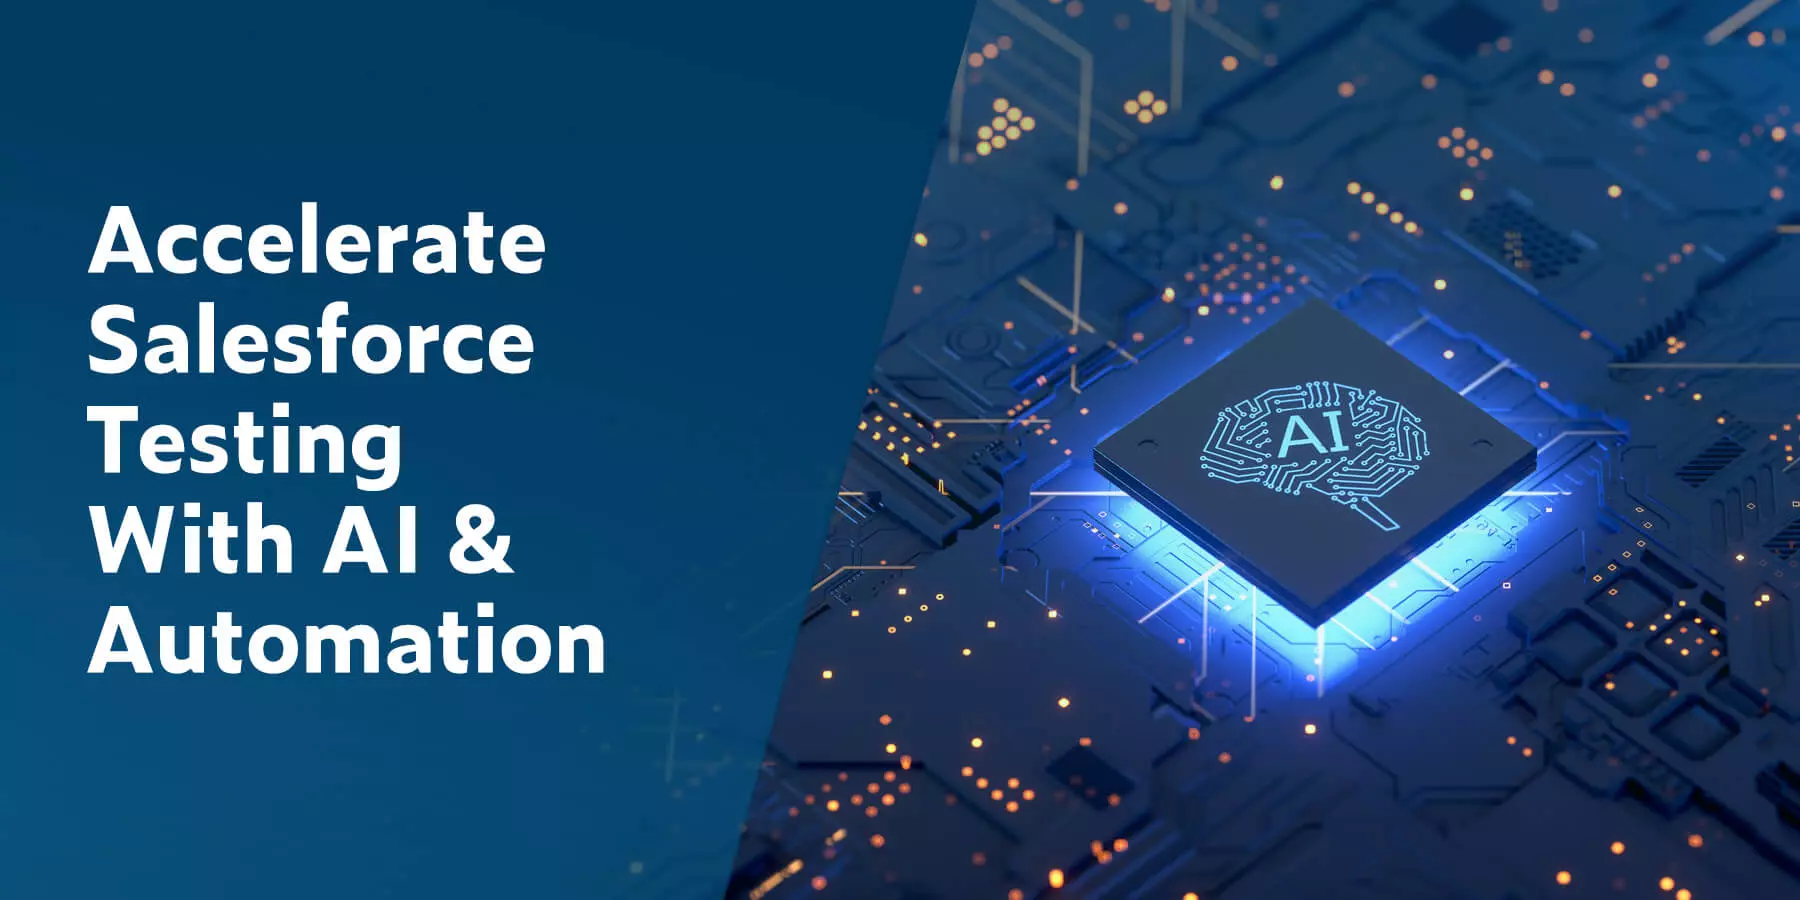 Accelerate Salesforce Testing With AI & Automation